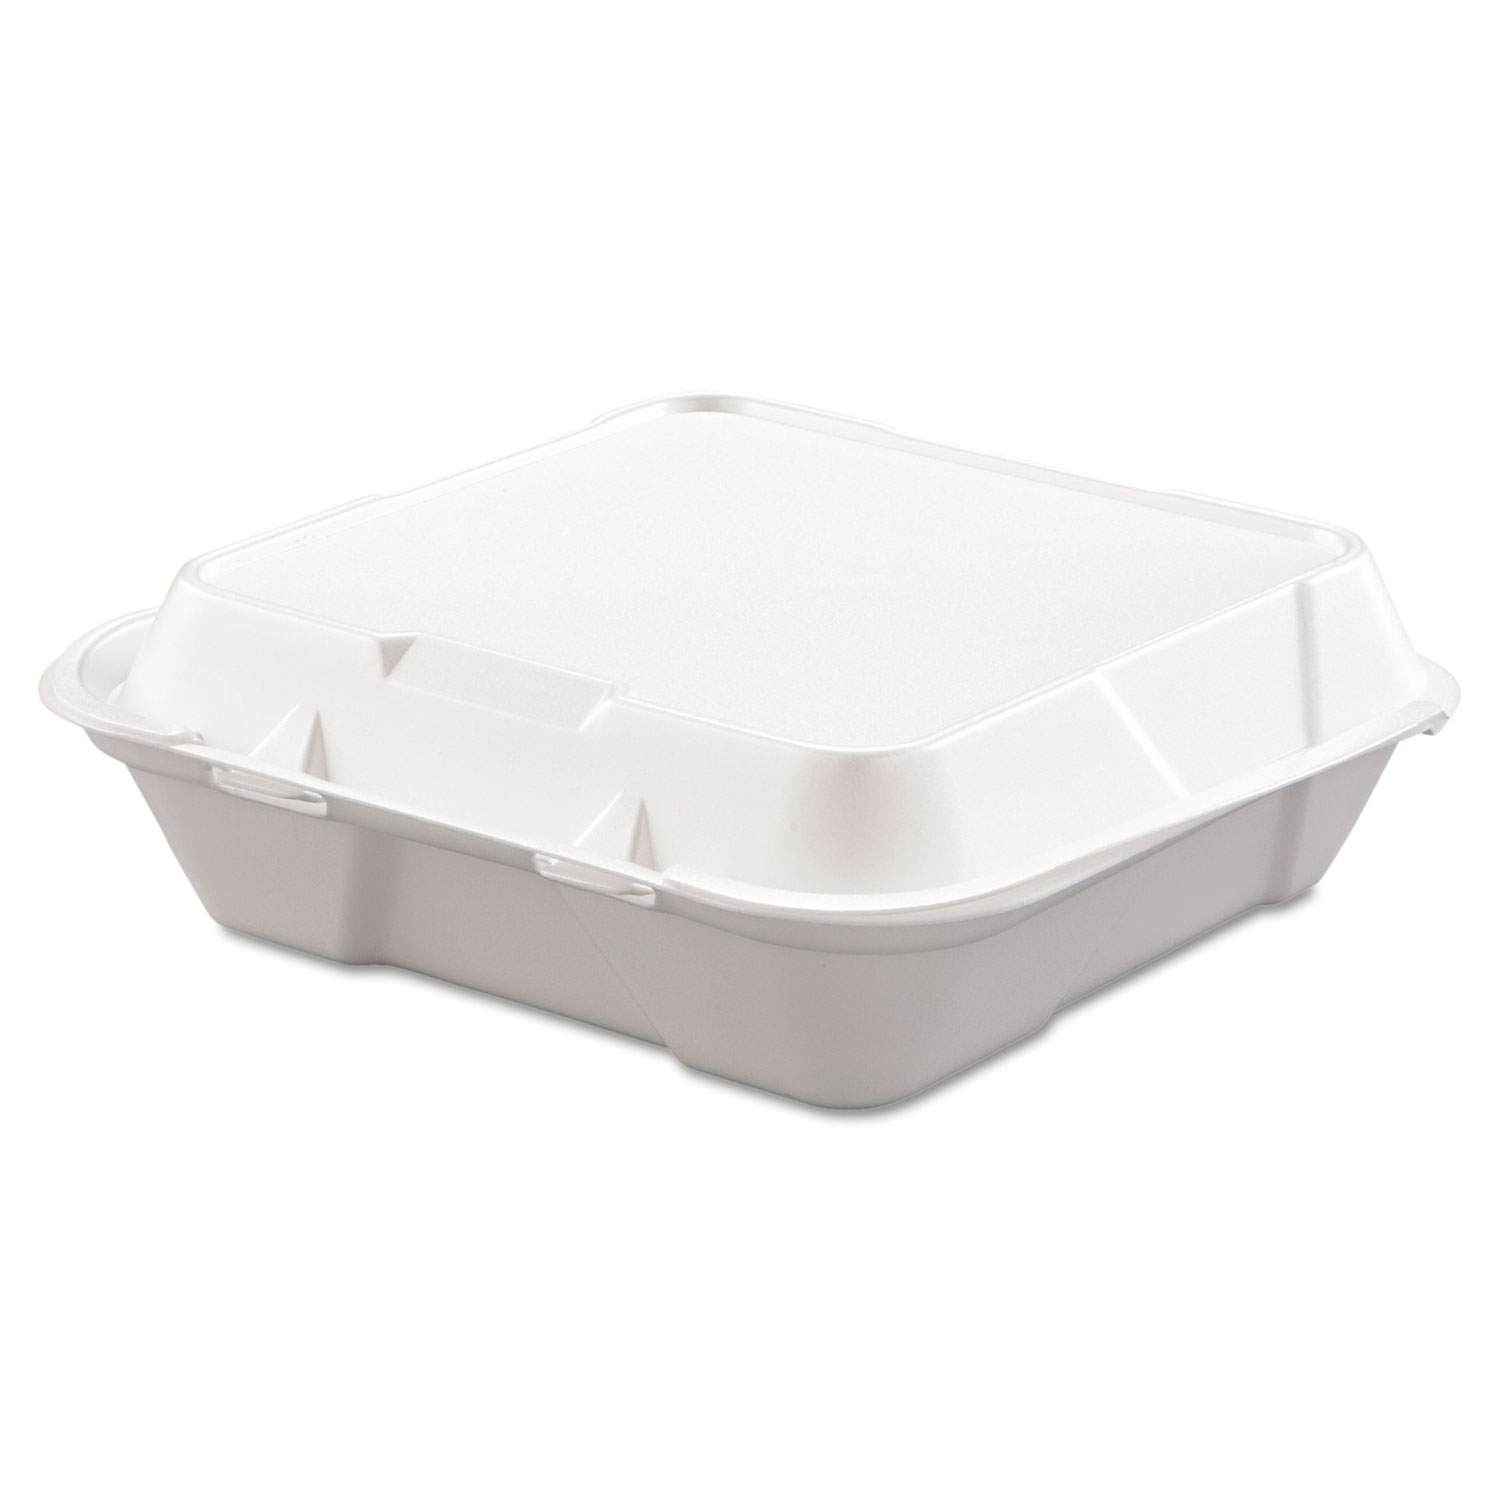 Snap-it Foam Hinged Lid Containers, 1-Comp, 9 1/4 x 9 1/4 x 3, White, 200/Carton